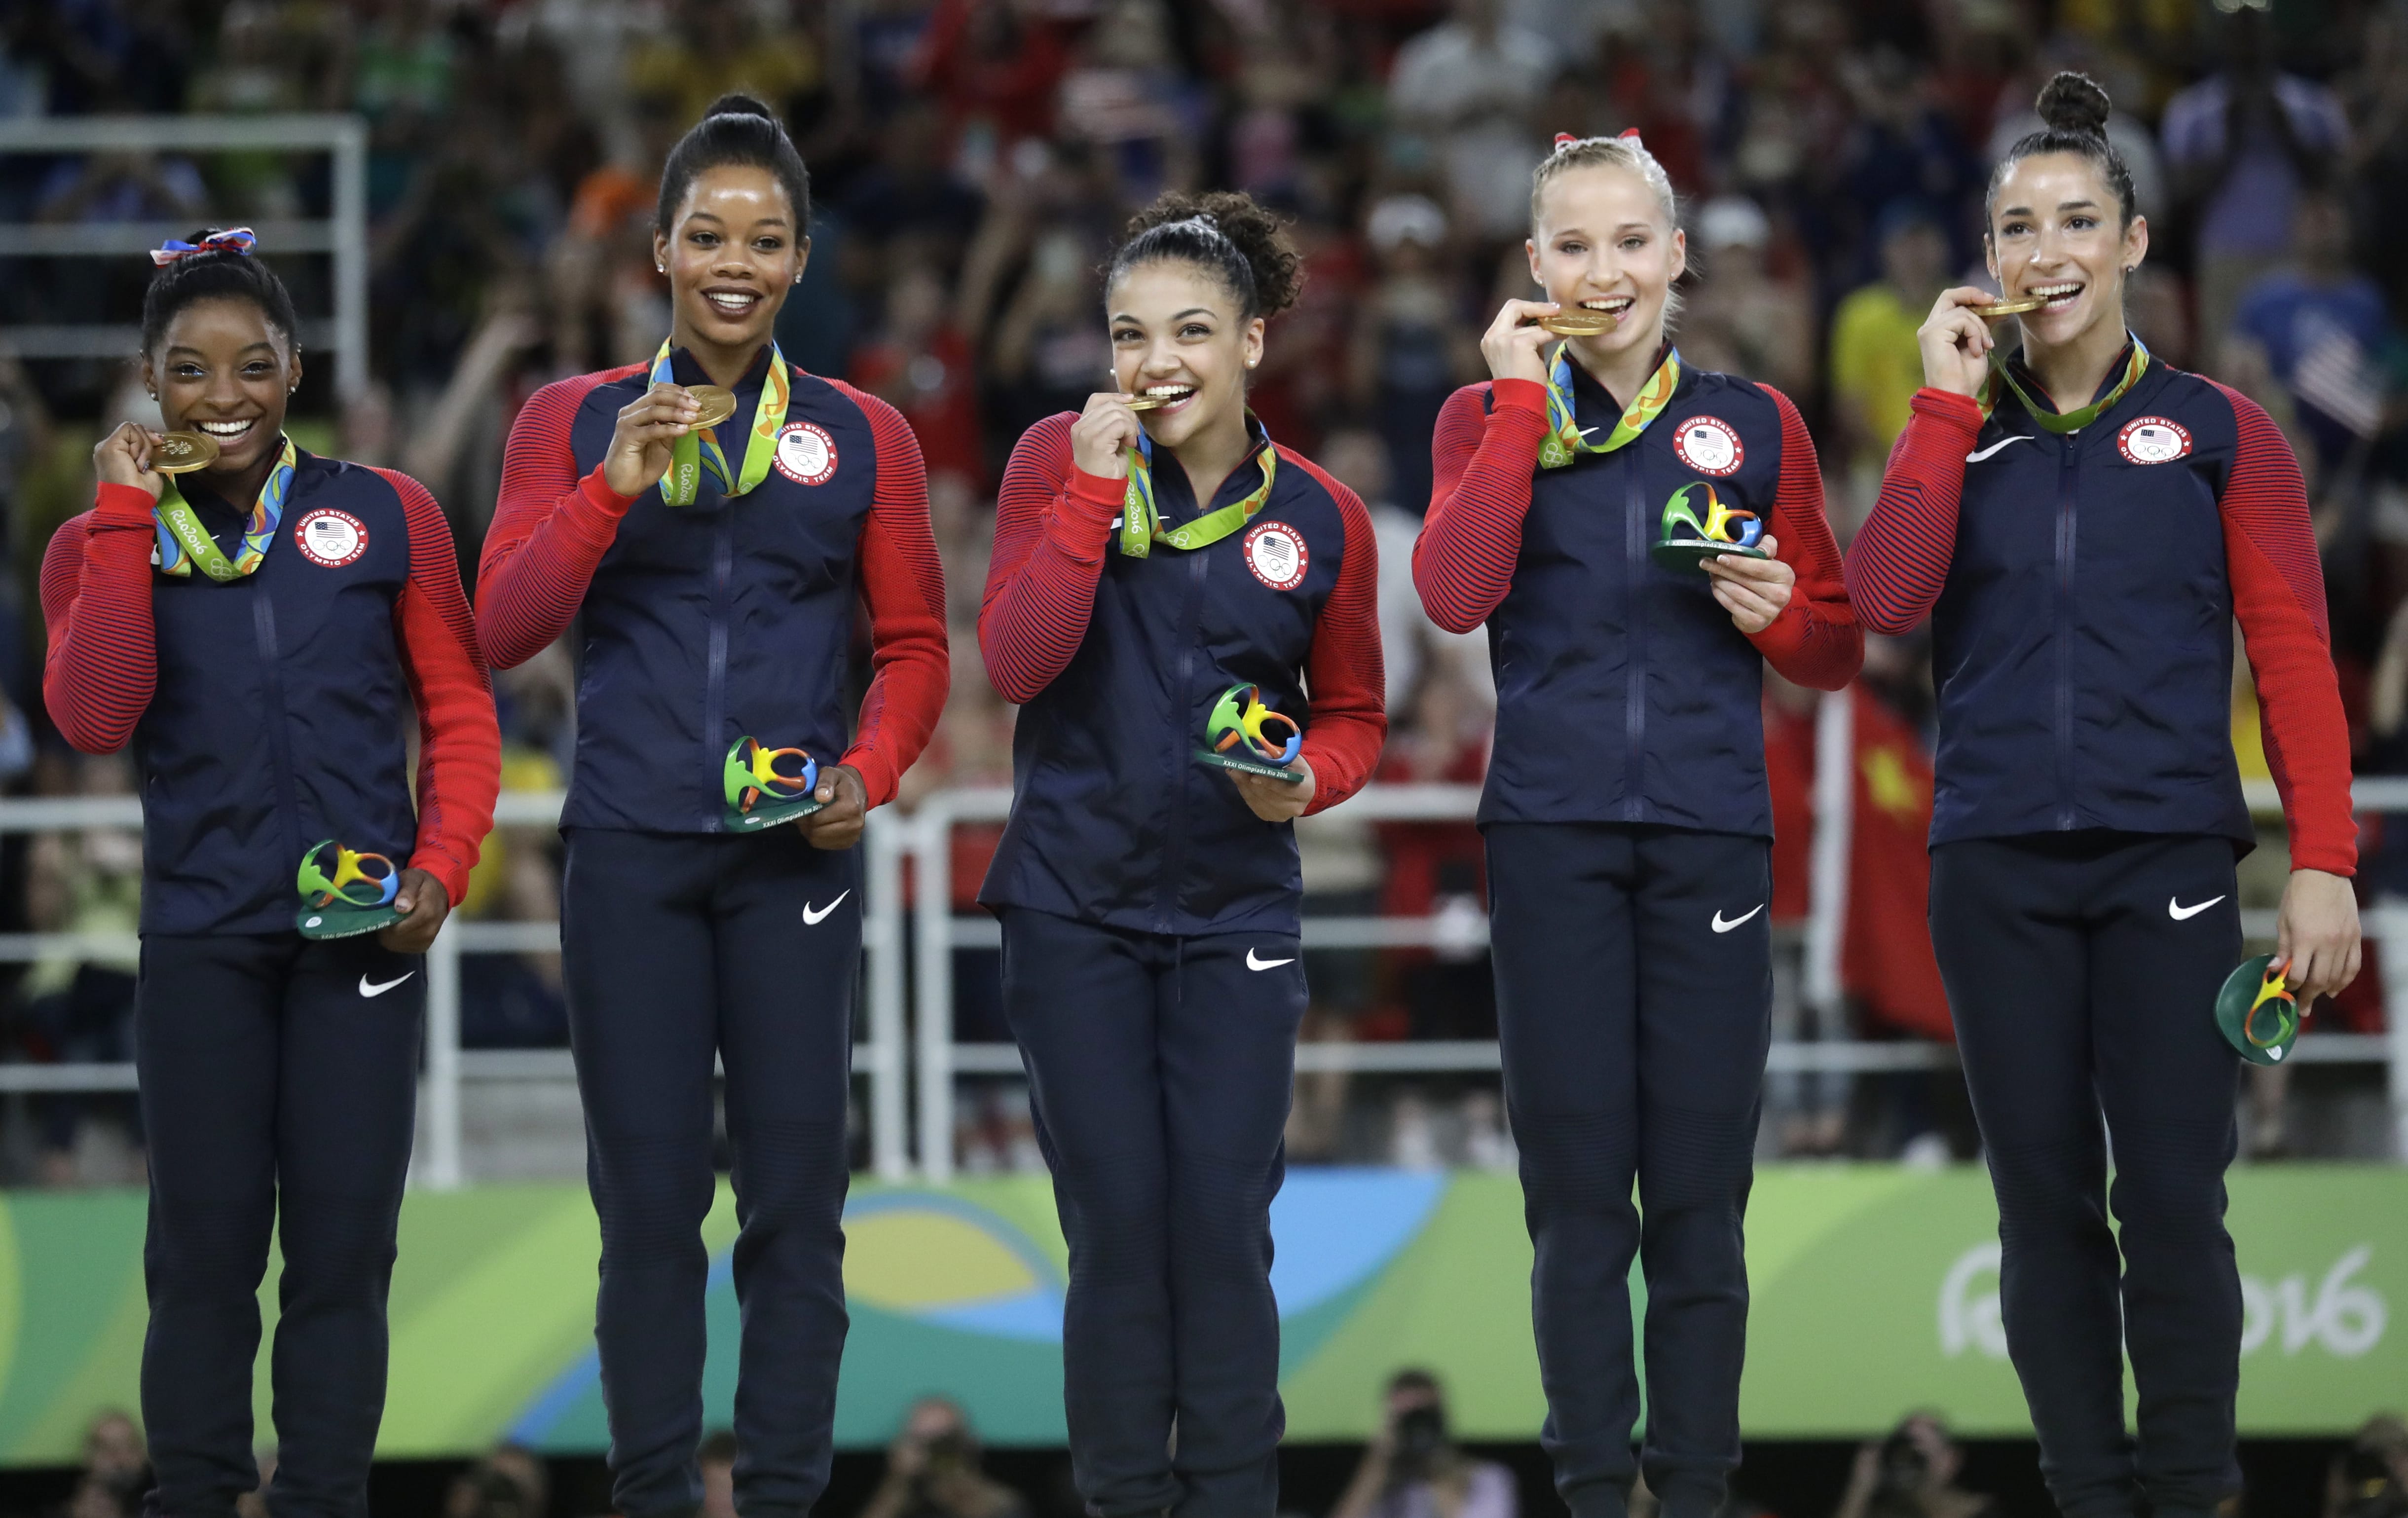 U.S. gymnasts, left to right, Simone Biles, Gabrielle Douglas, Lauren Hernandez, Madison Kocian and Aly Raisman hold their gold medals during the medal ceremony for the artistic gymnastics women's team at the 2016 Summer Olympics in Rio de Janeiro, Brazil, Tuesday, Aug. 9, 2016.